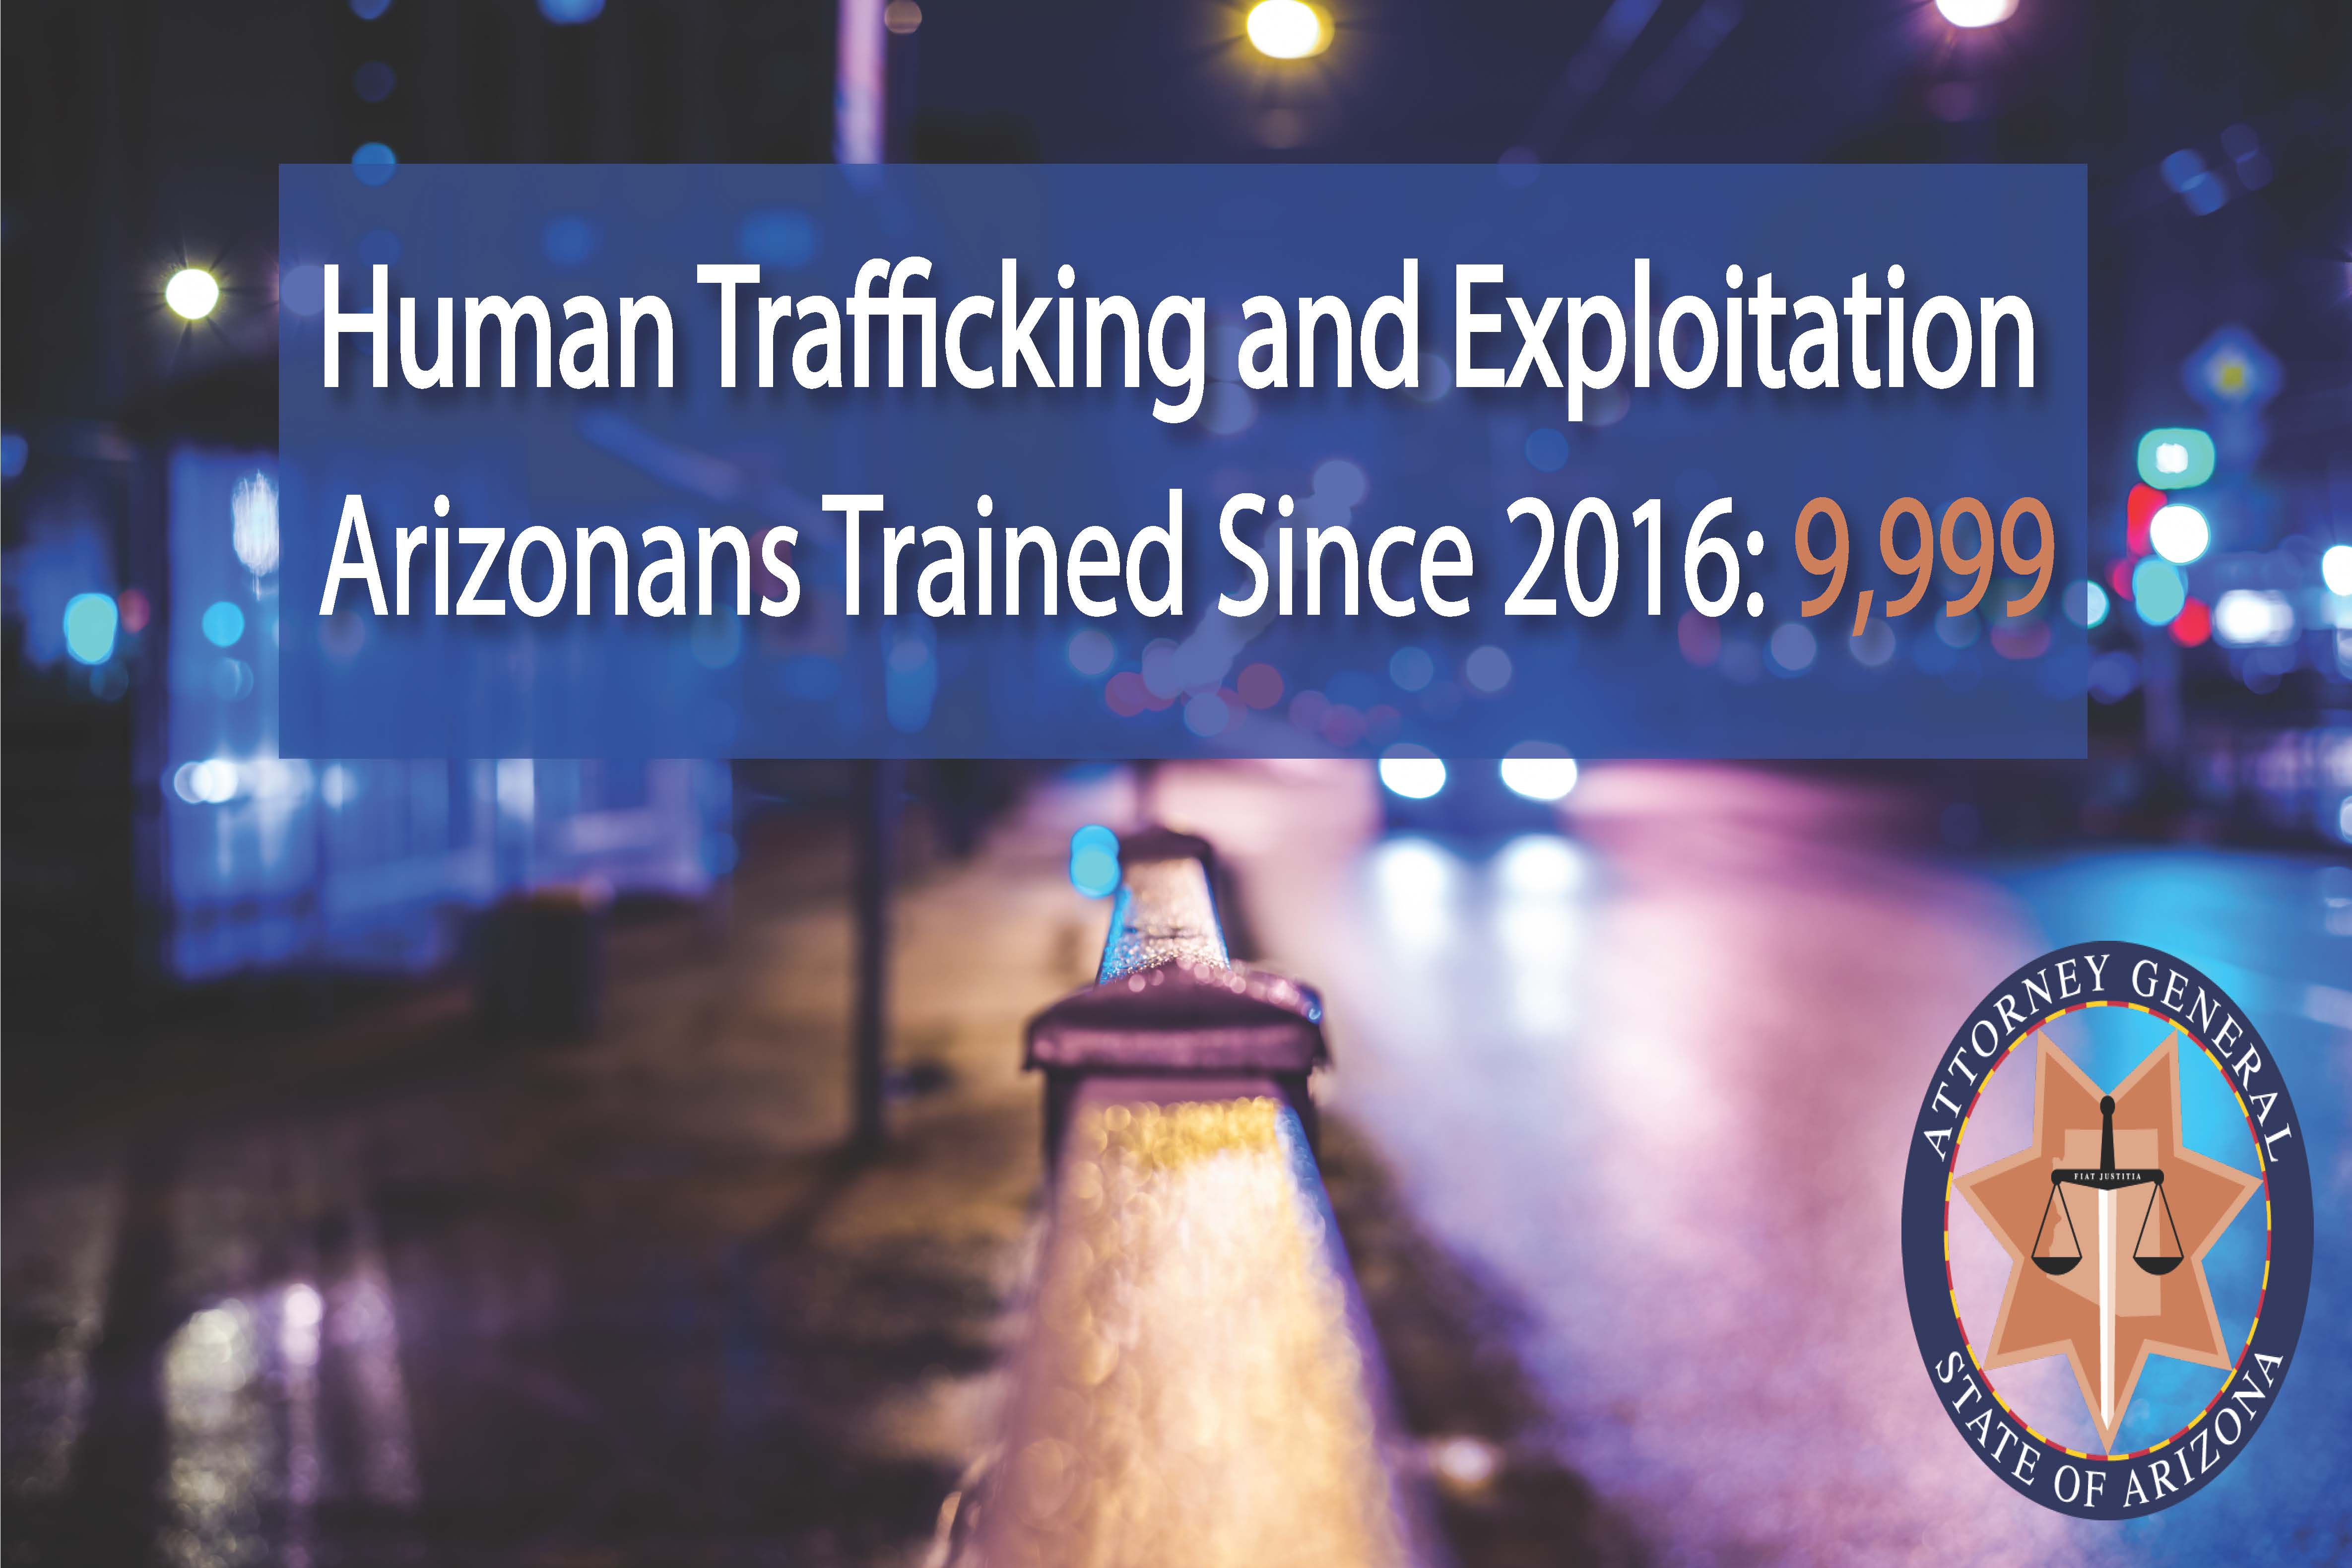 Graphic highlighting 6,825 individuals trained by program.